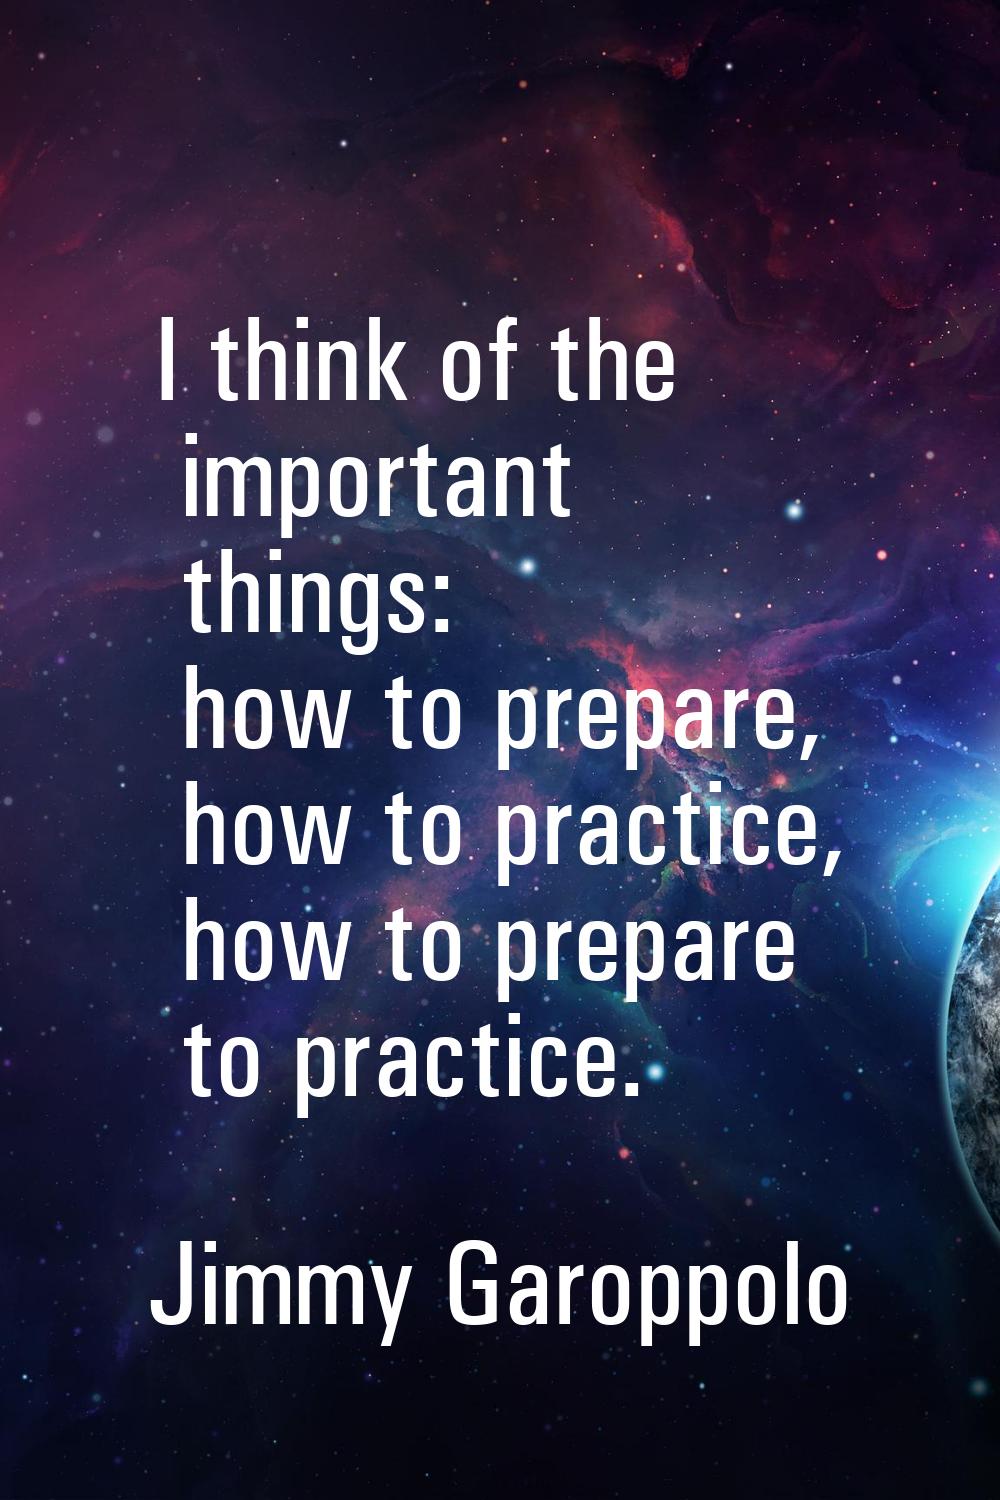 I think of the important things: how to prepare, how to practice, how to prepare to practice.